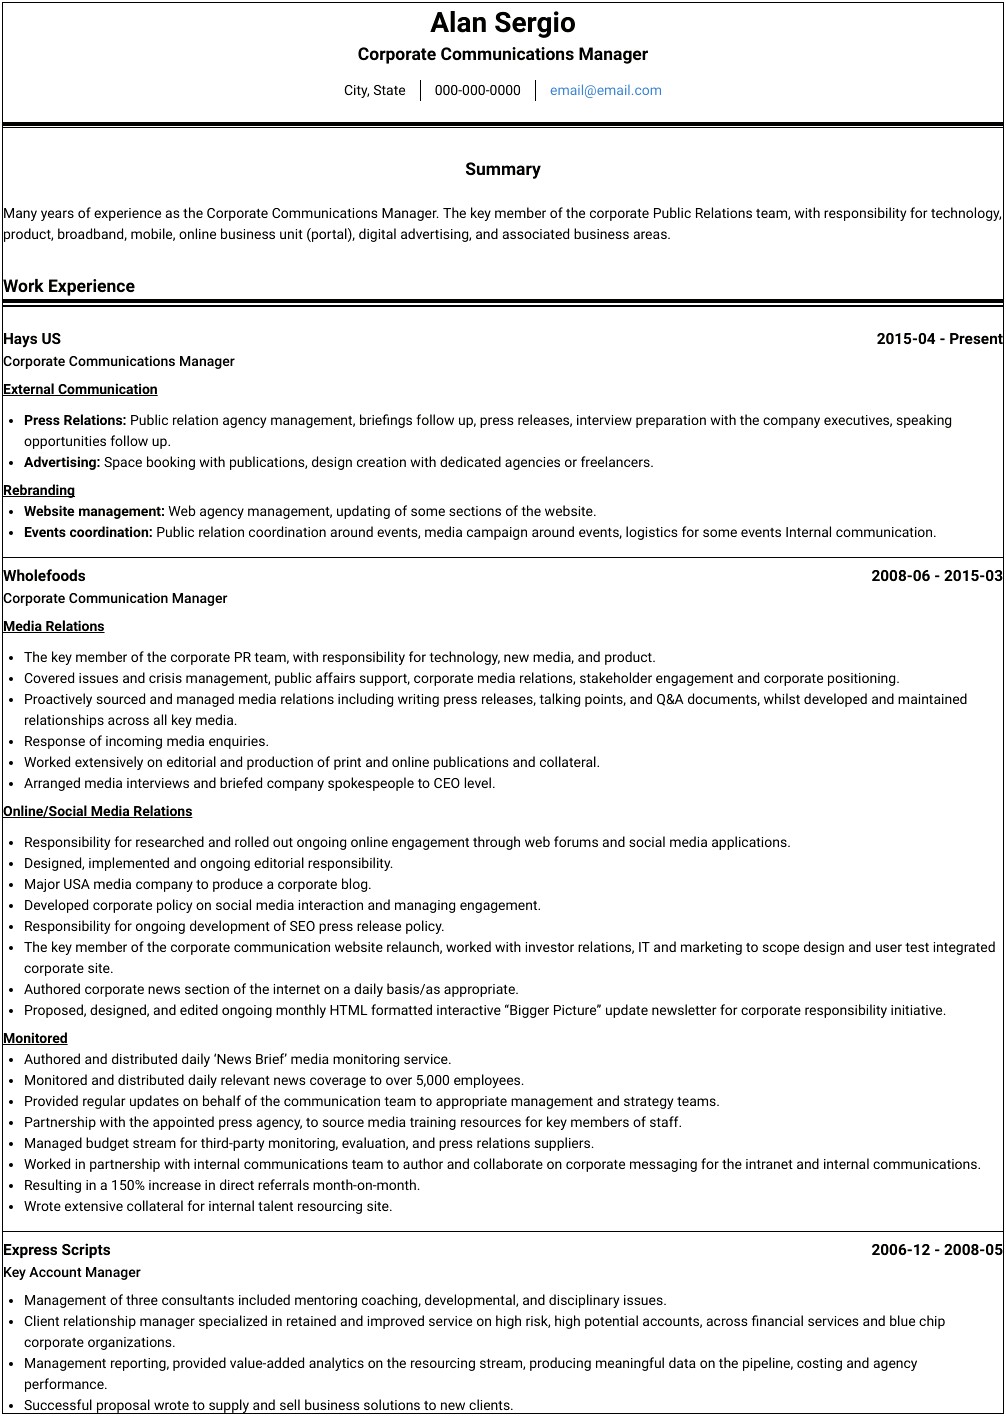 Sample Resume Of Corporate Communication Manager